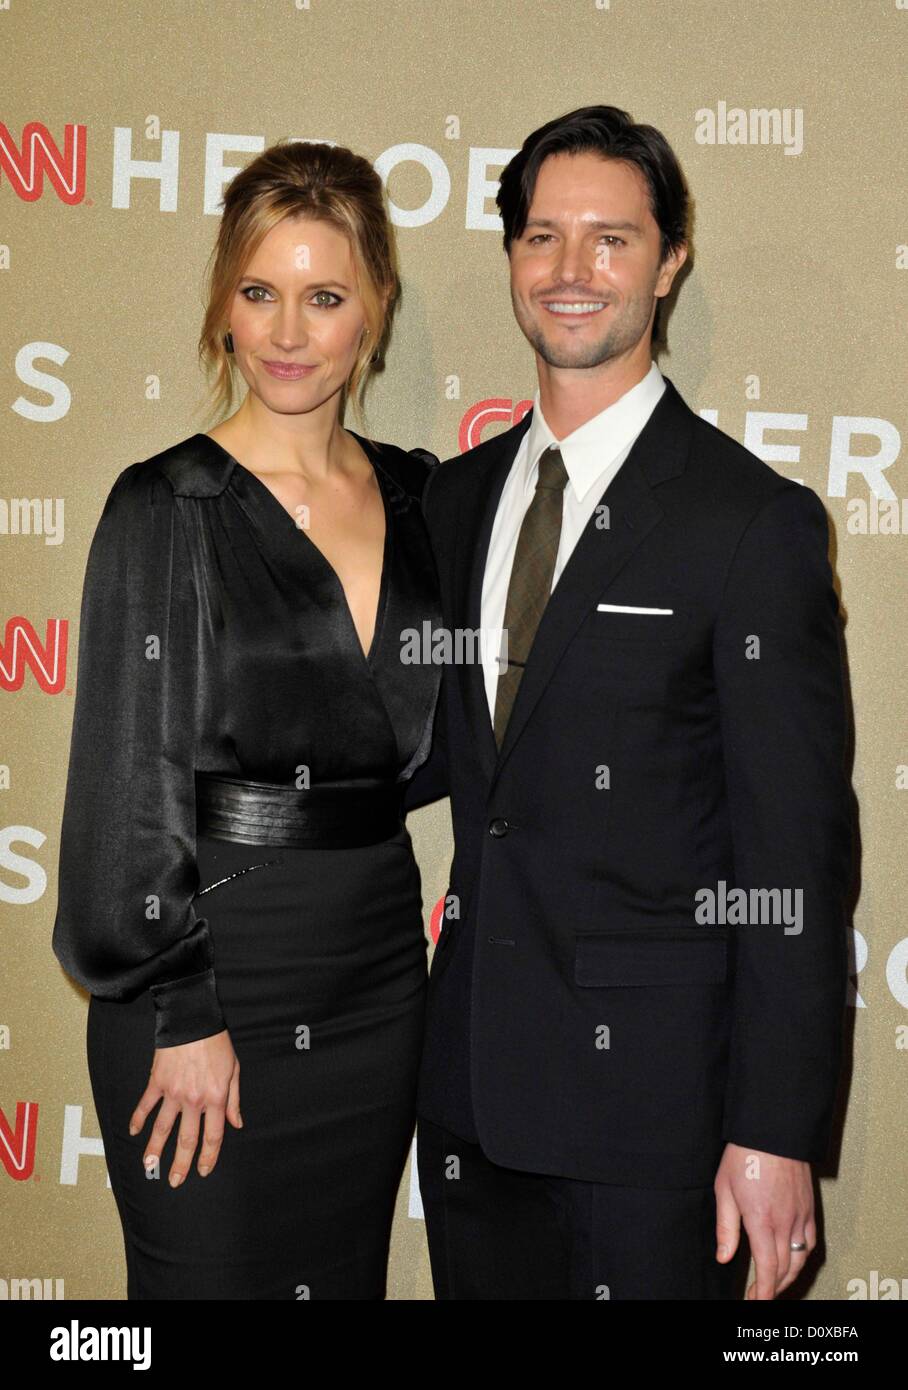 Los Angeles, California. 2nd December 2012. KaDee Strickland, Jason Behr at arrivals for CNN Heroes: An All-Star Tribute, Shrine Auditorium, Los Angeles, CA December 2, 2012. Photo By: Dee Cercone/Everett Collection Stock Photo